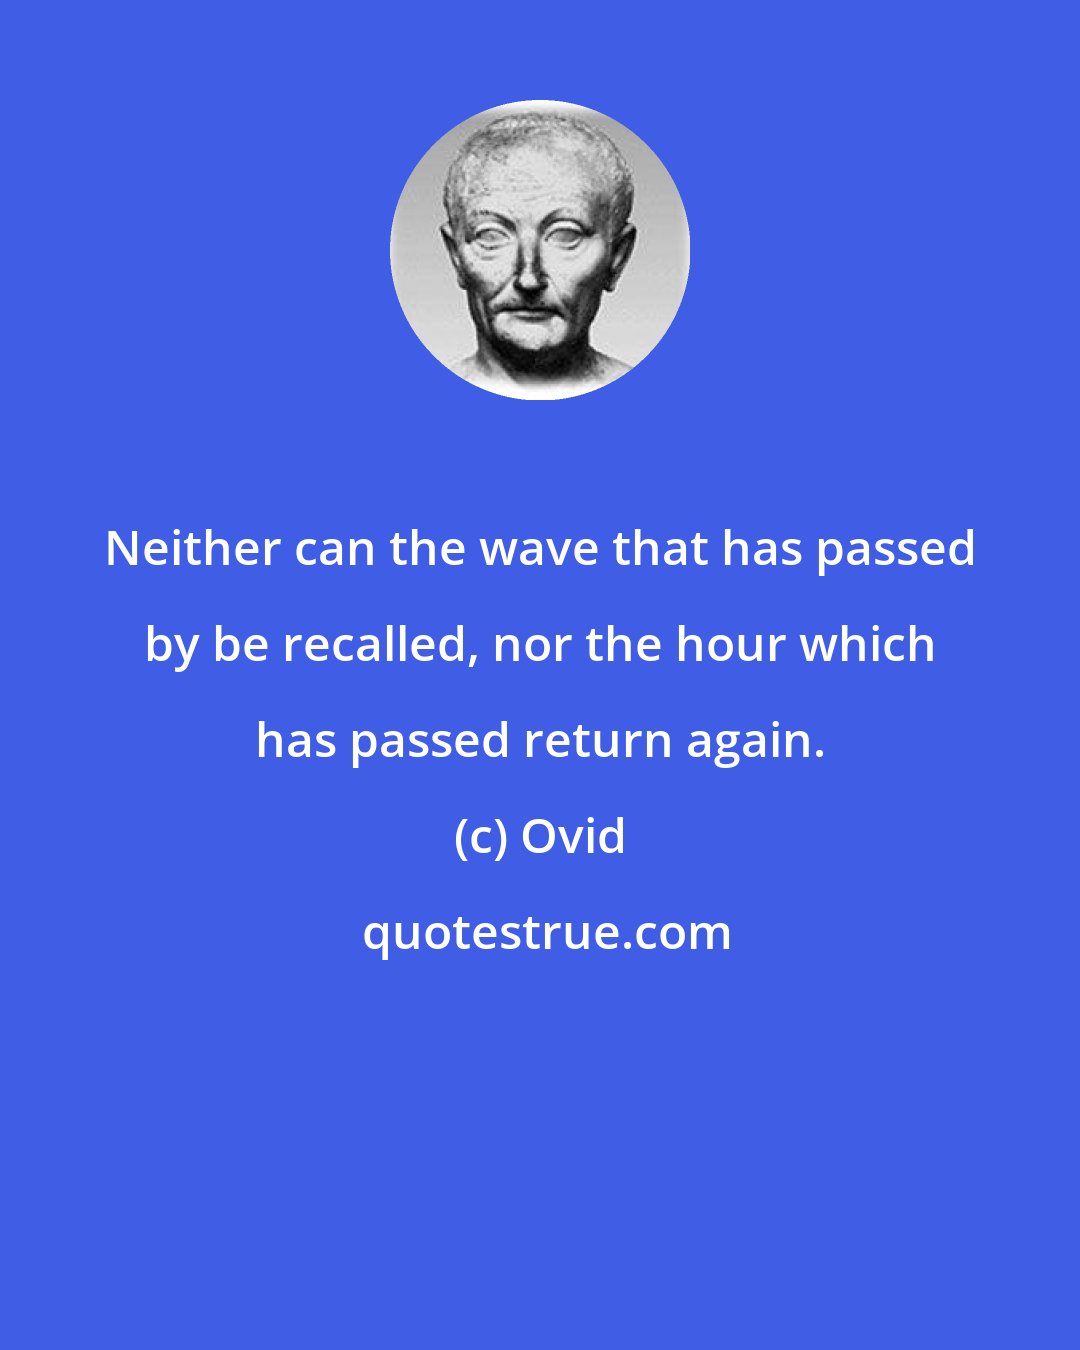 Ovid: Neither can the wave that has passed by be recalled, nor the hour which has passed return again.